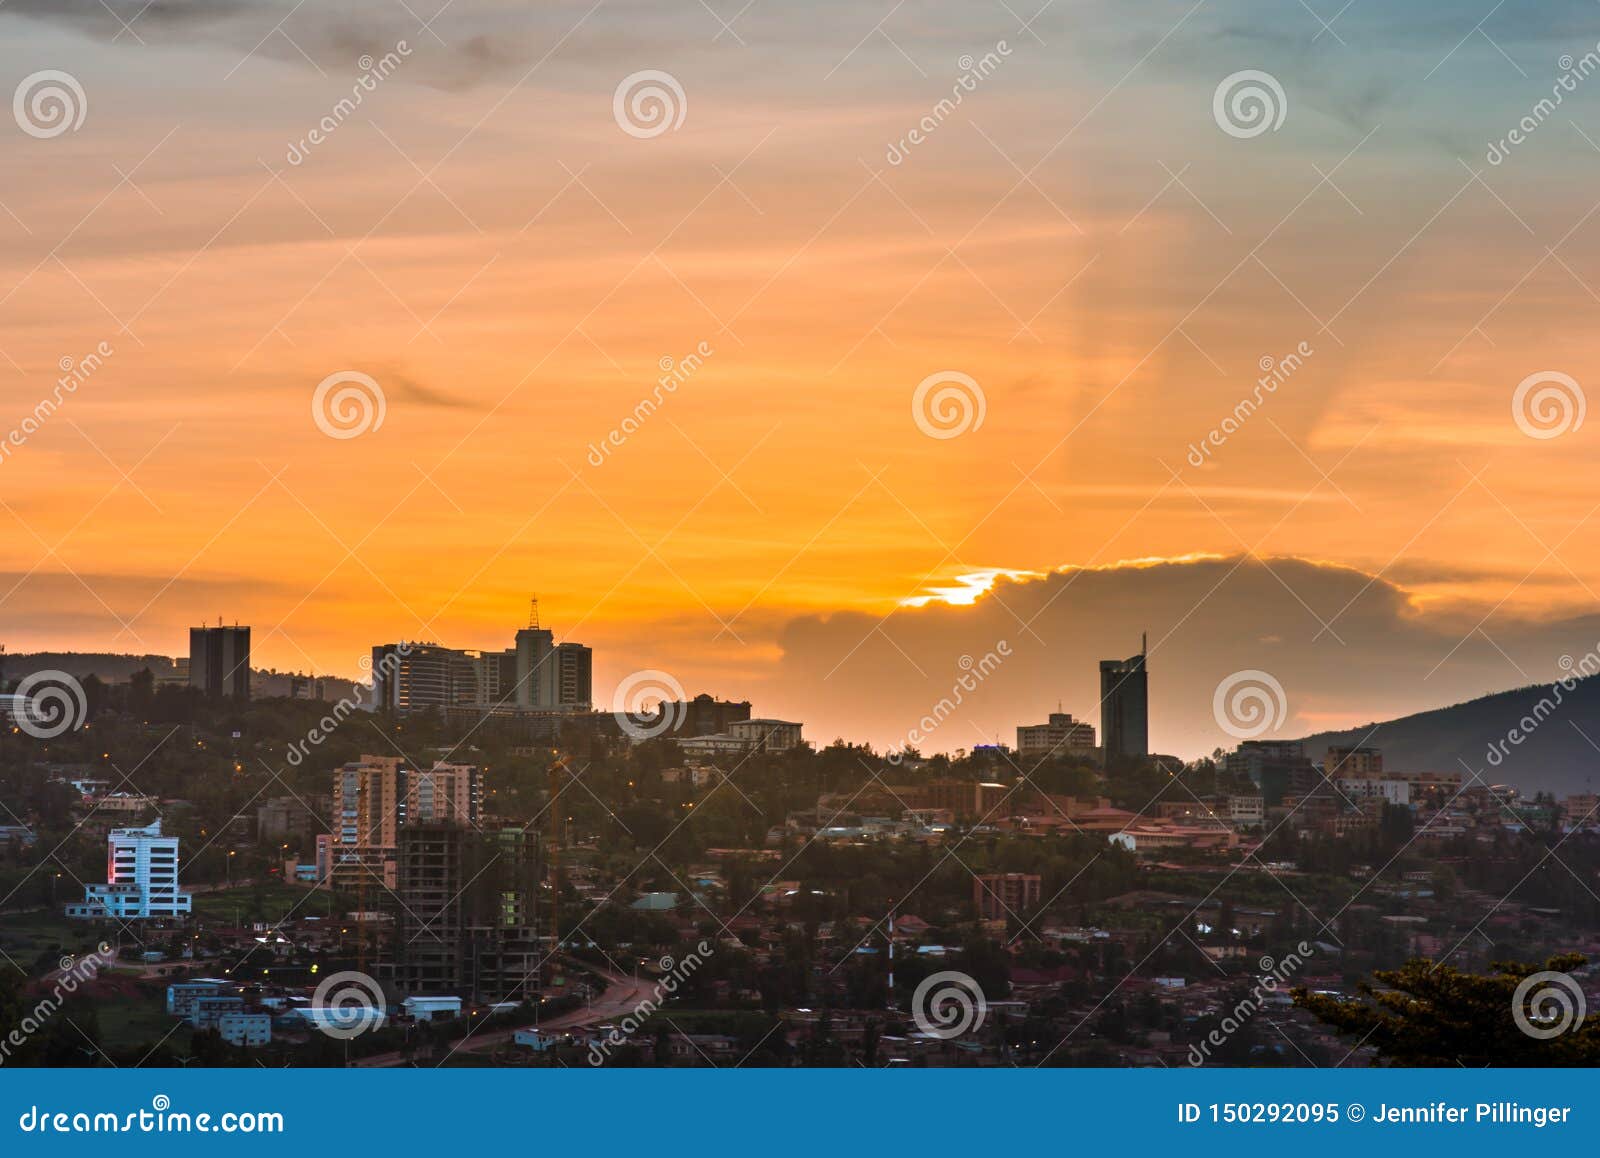 kigali city centre skyline and surrounding areas under colorful clouds at sunset. rwanda